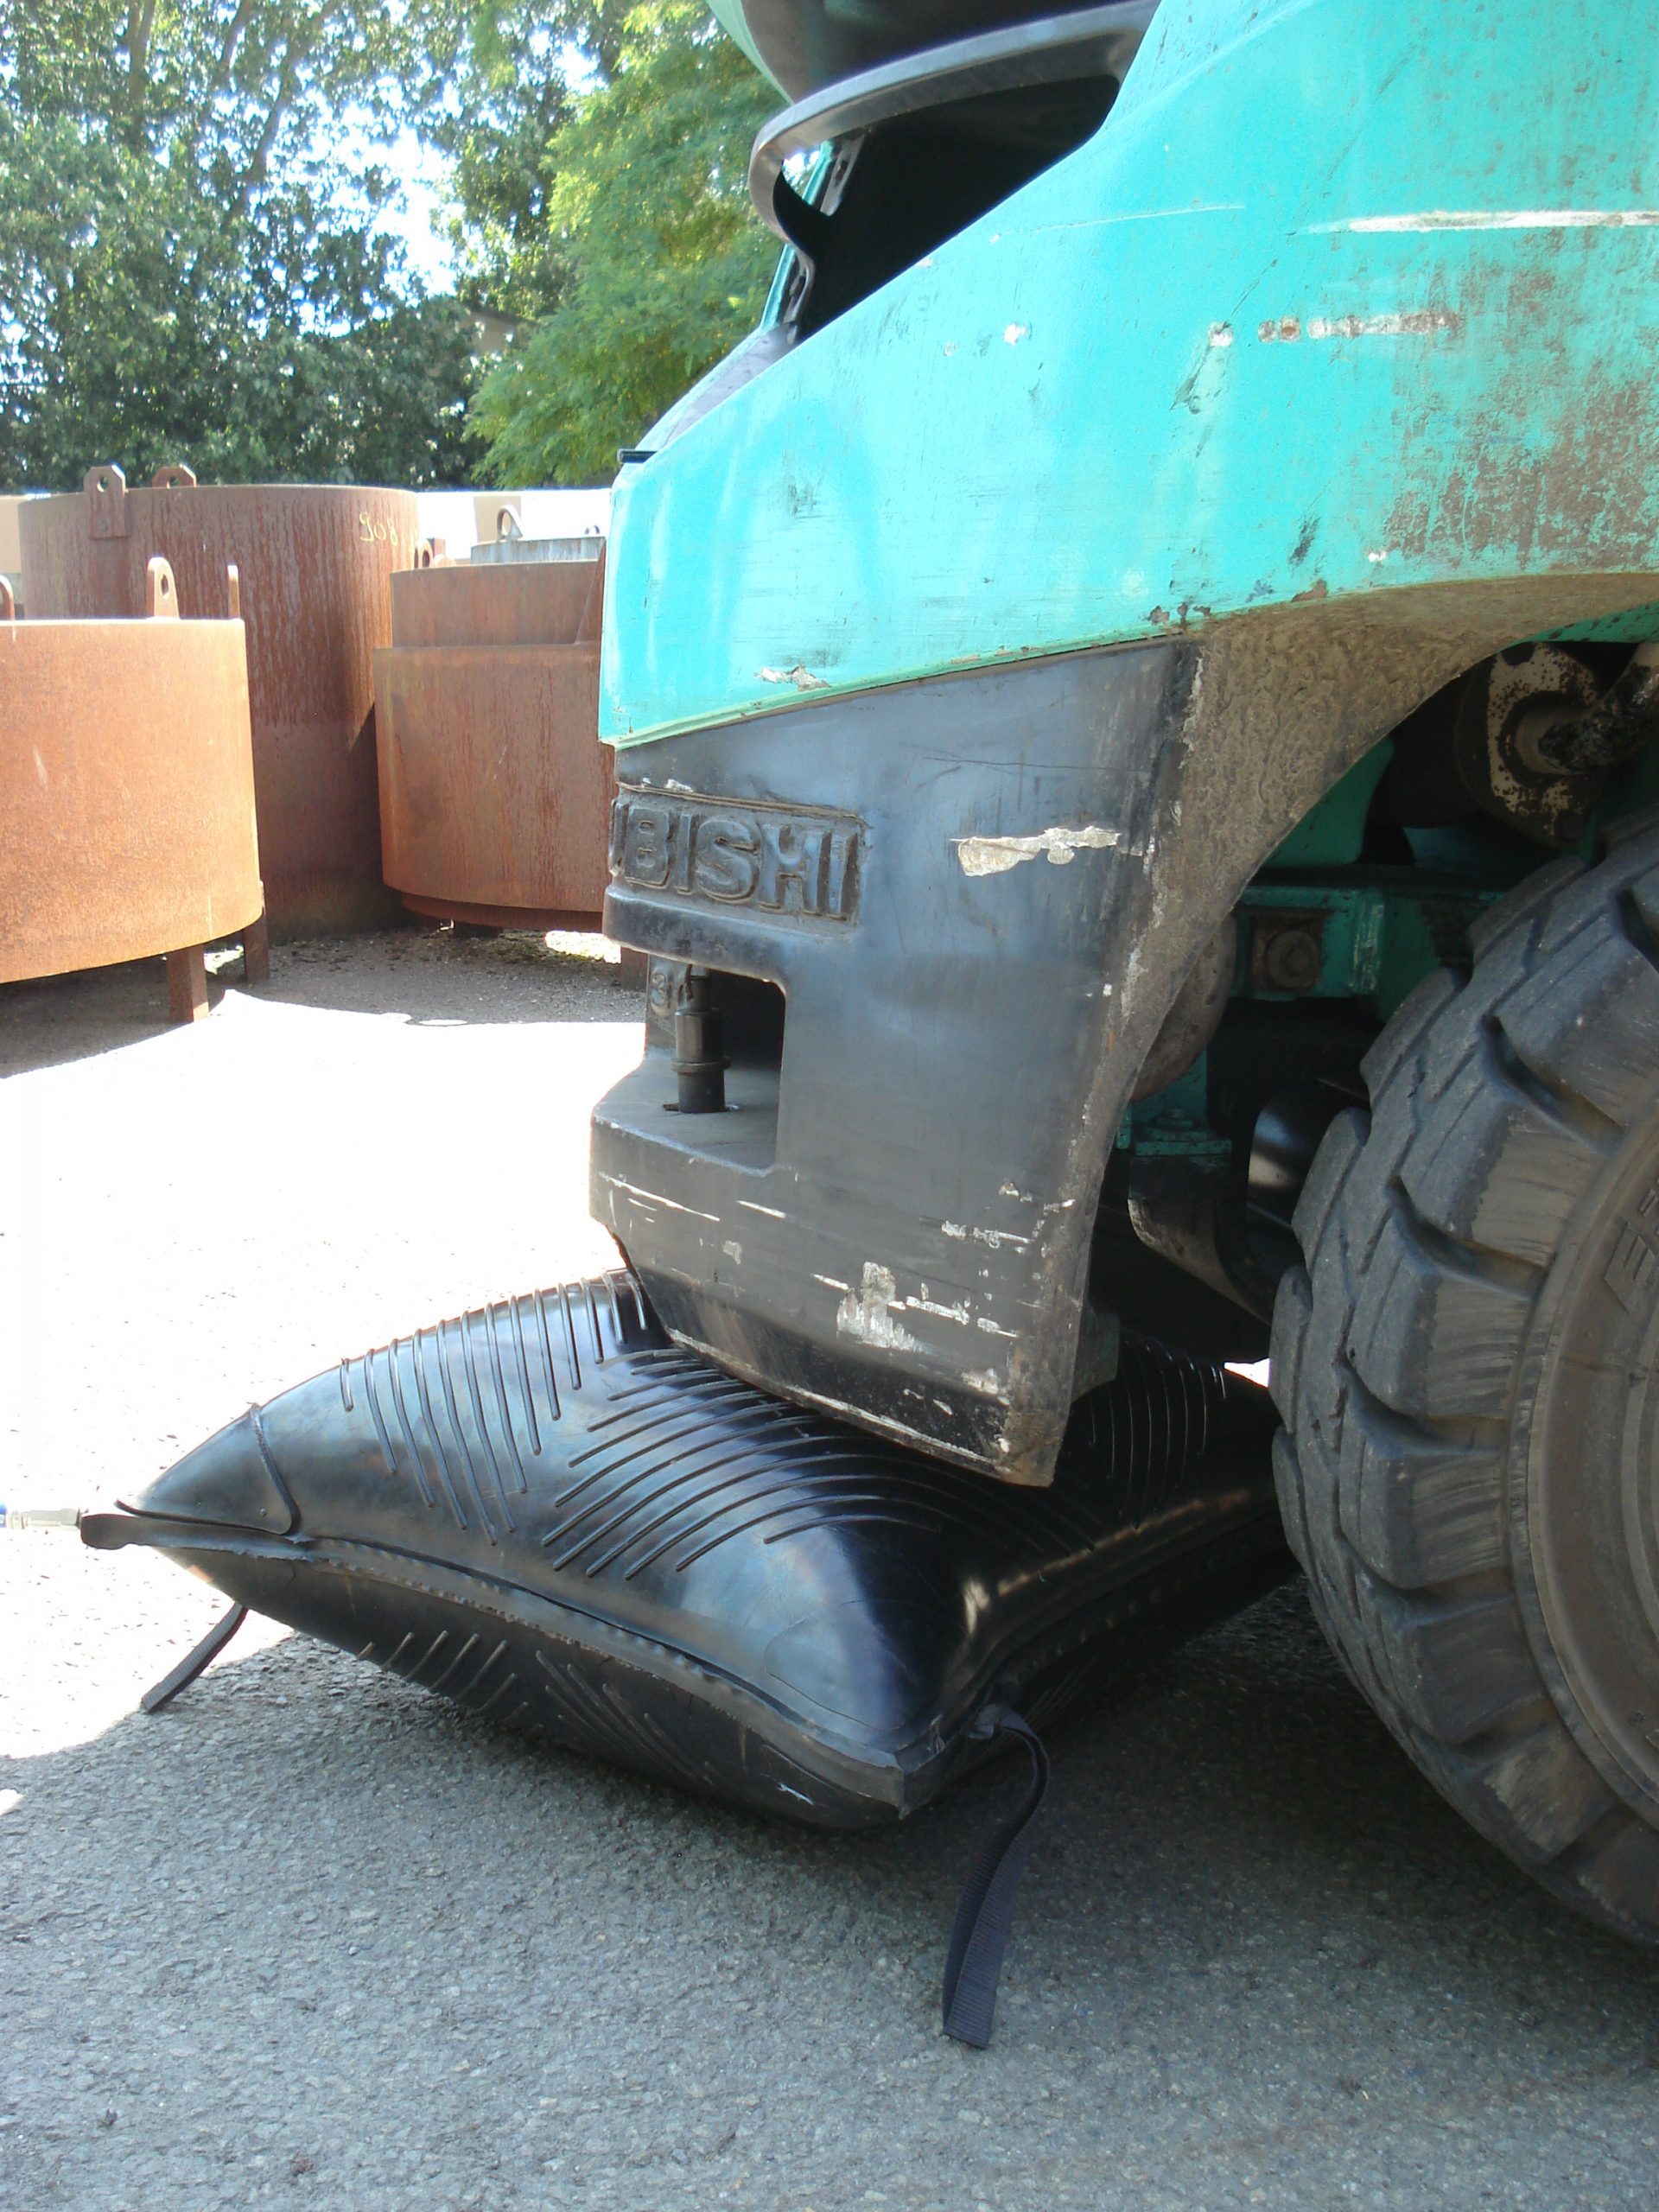 Air Jack being used on a truck